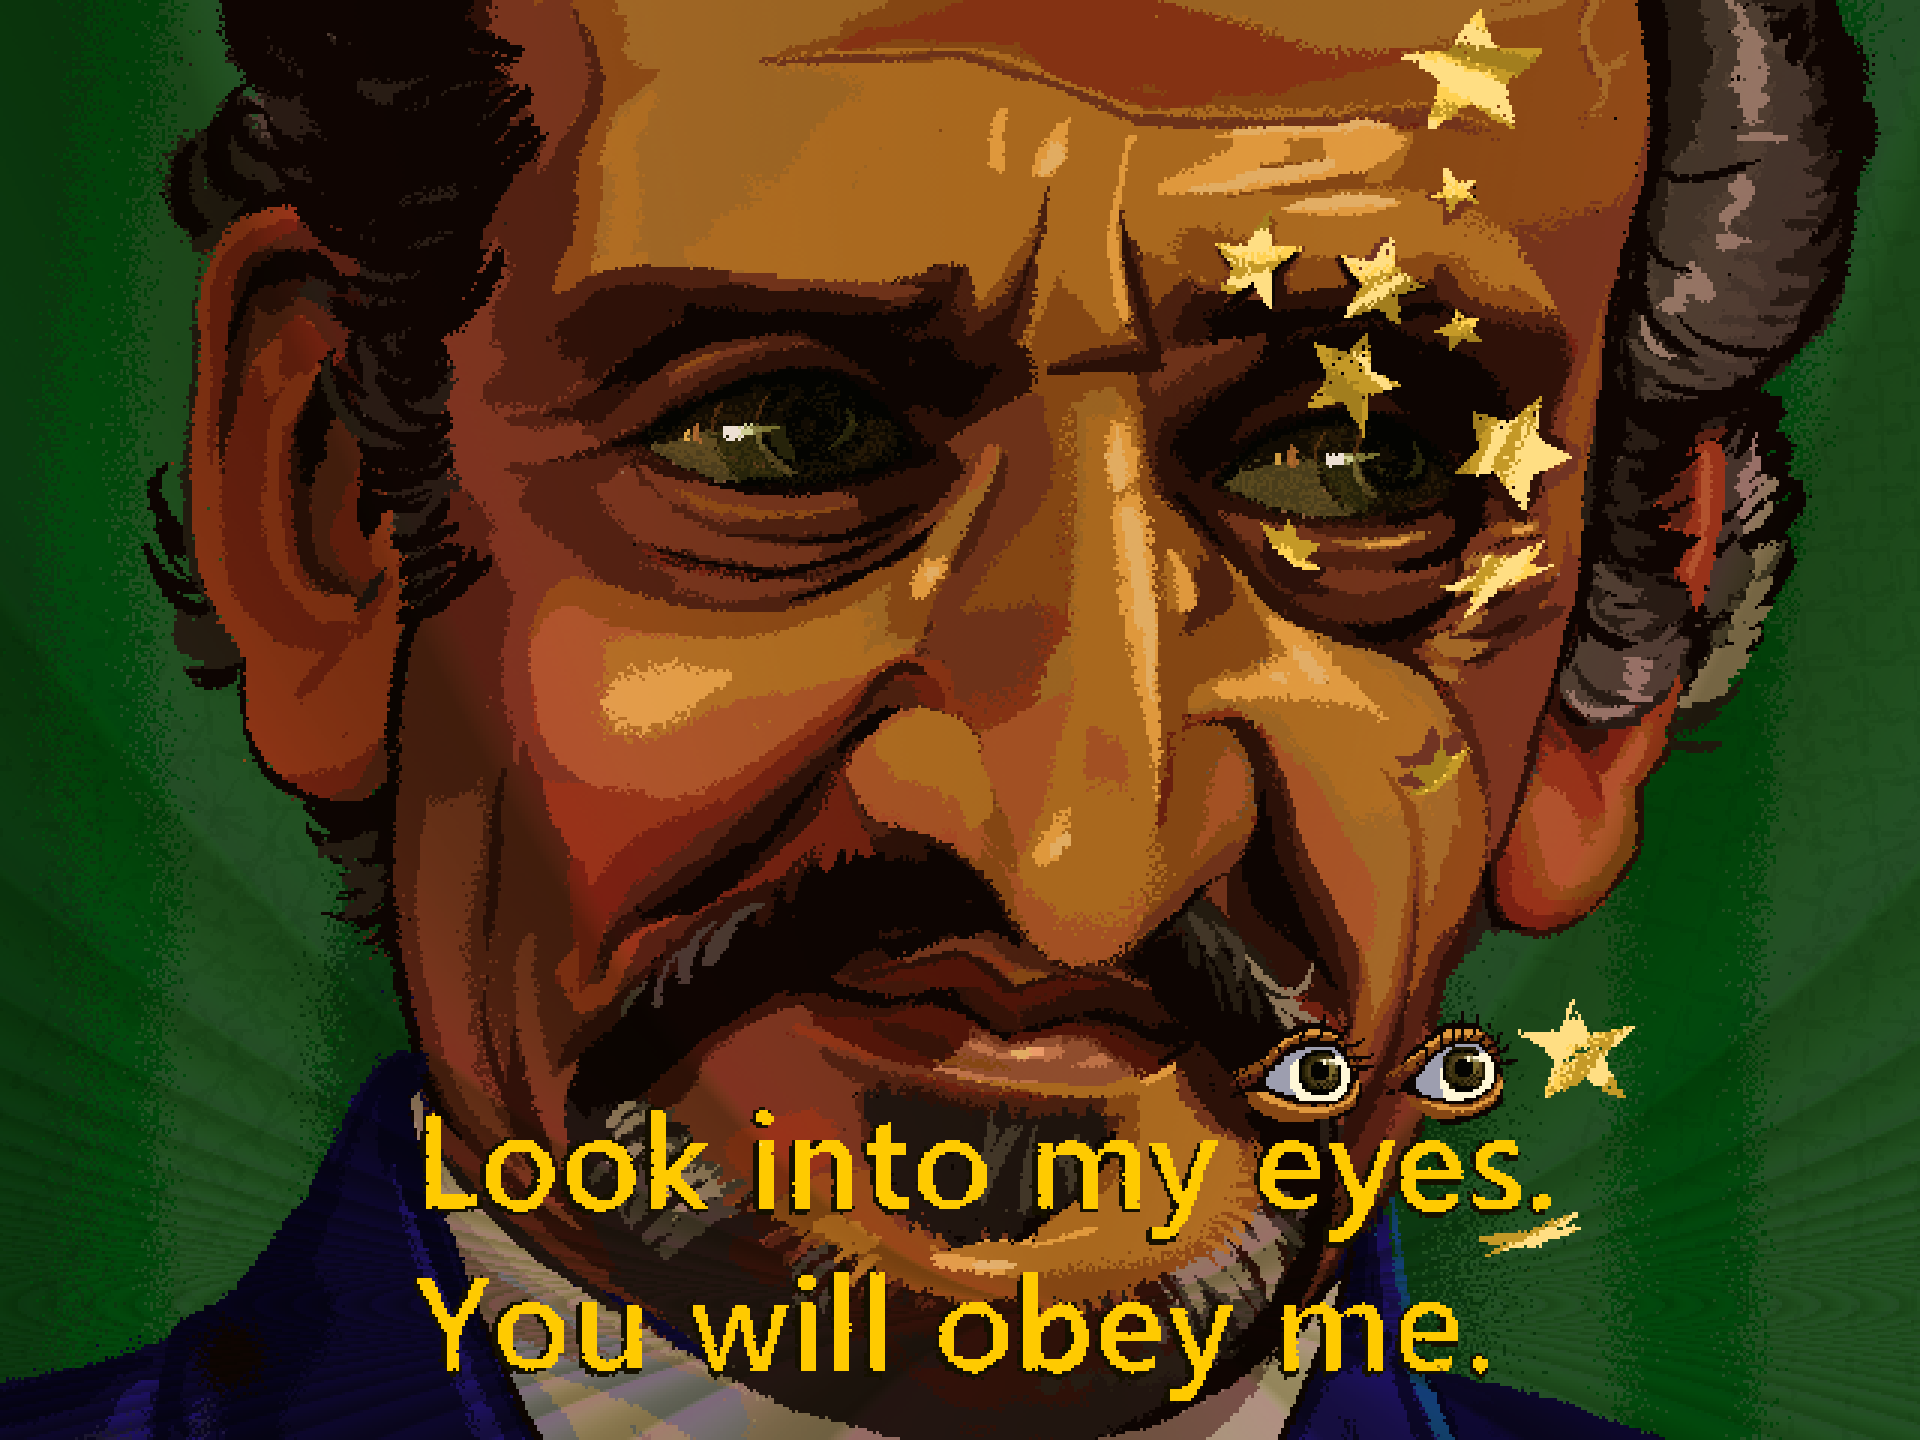 Pixel art drawing of the Master from Doctor Who as played by Roger Delgado. He is a light-skinned adult man with a pronounced widow's peak, and dark hair with gray streaks. He has a goatee and looks like an evil magician. He is smiling slightly and has large eyes and nose, and small lips. The text 'Look into my eyes. You will obey me.' is written on the picture, and there are star stickers falling down over his left eye.